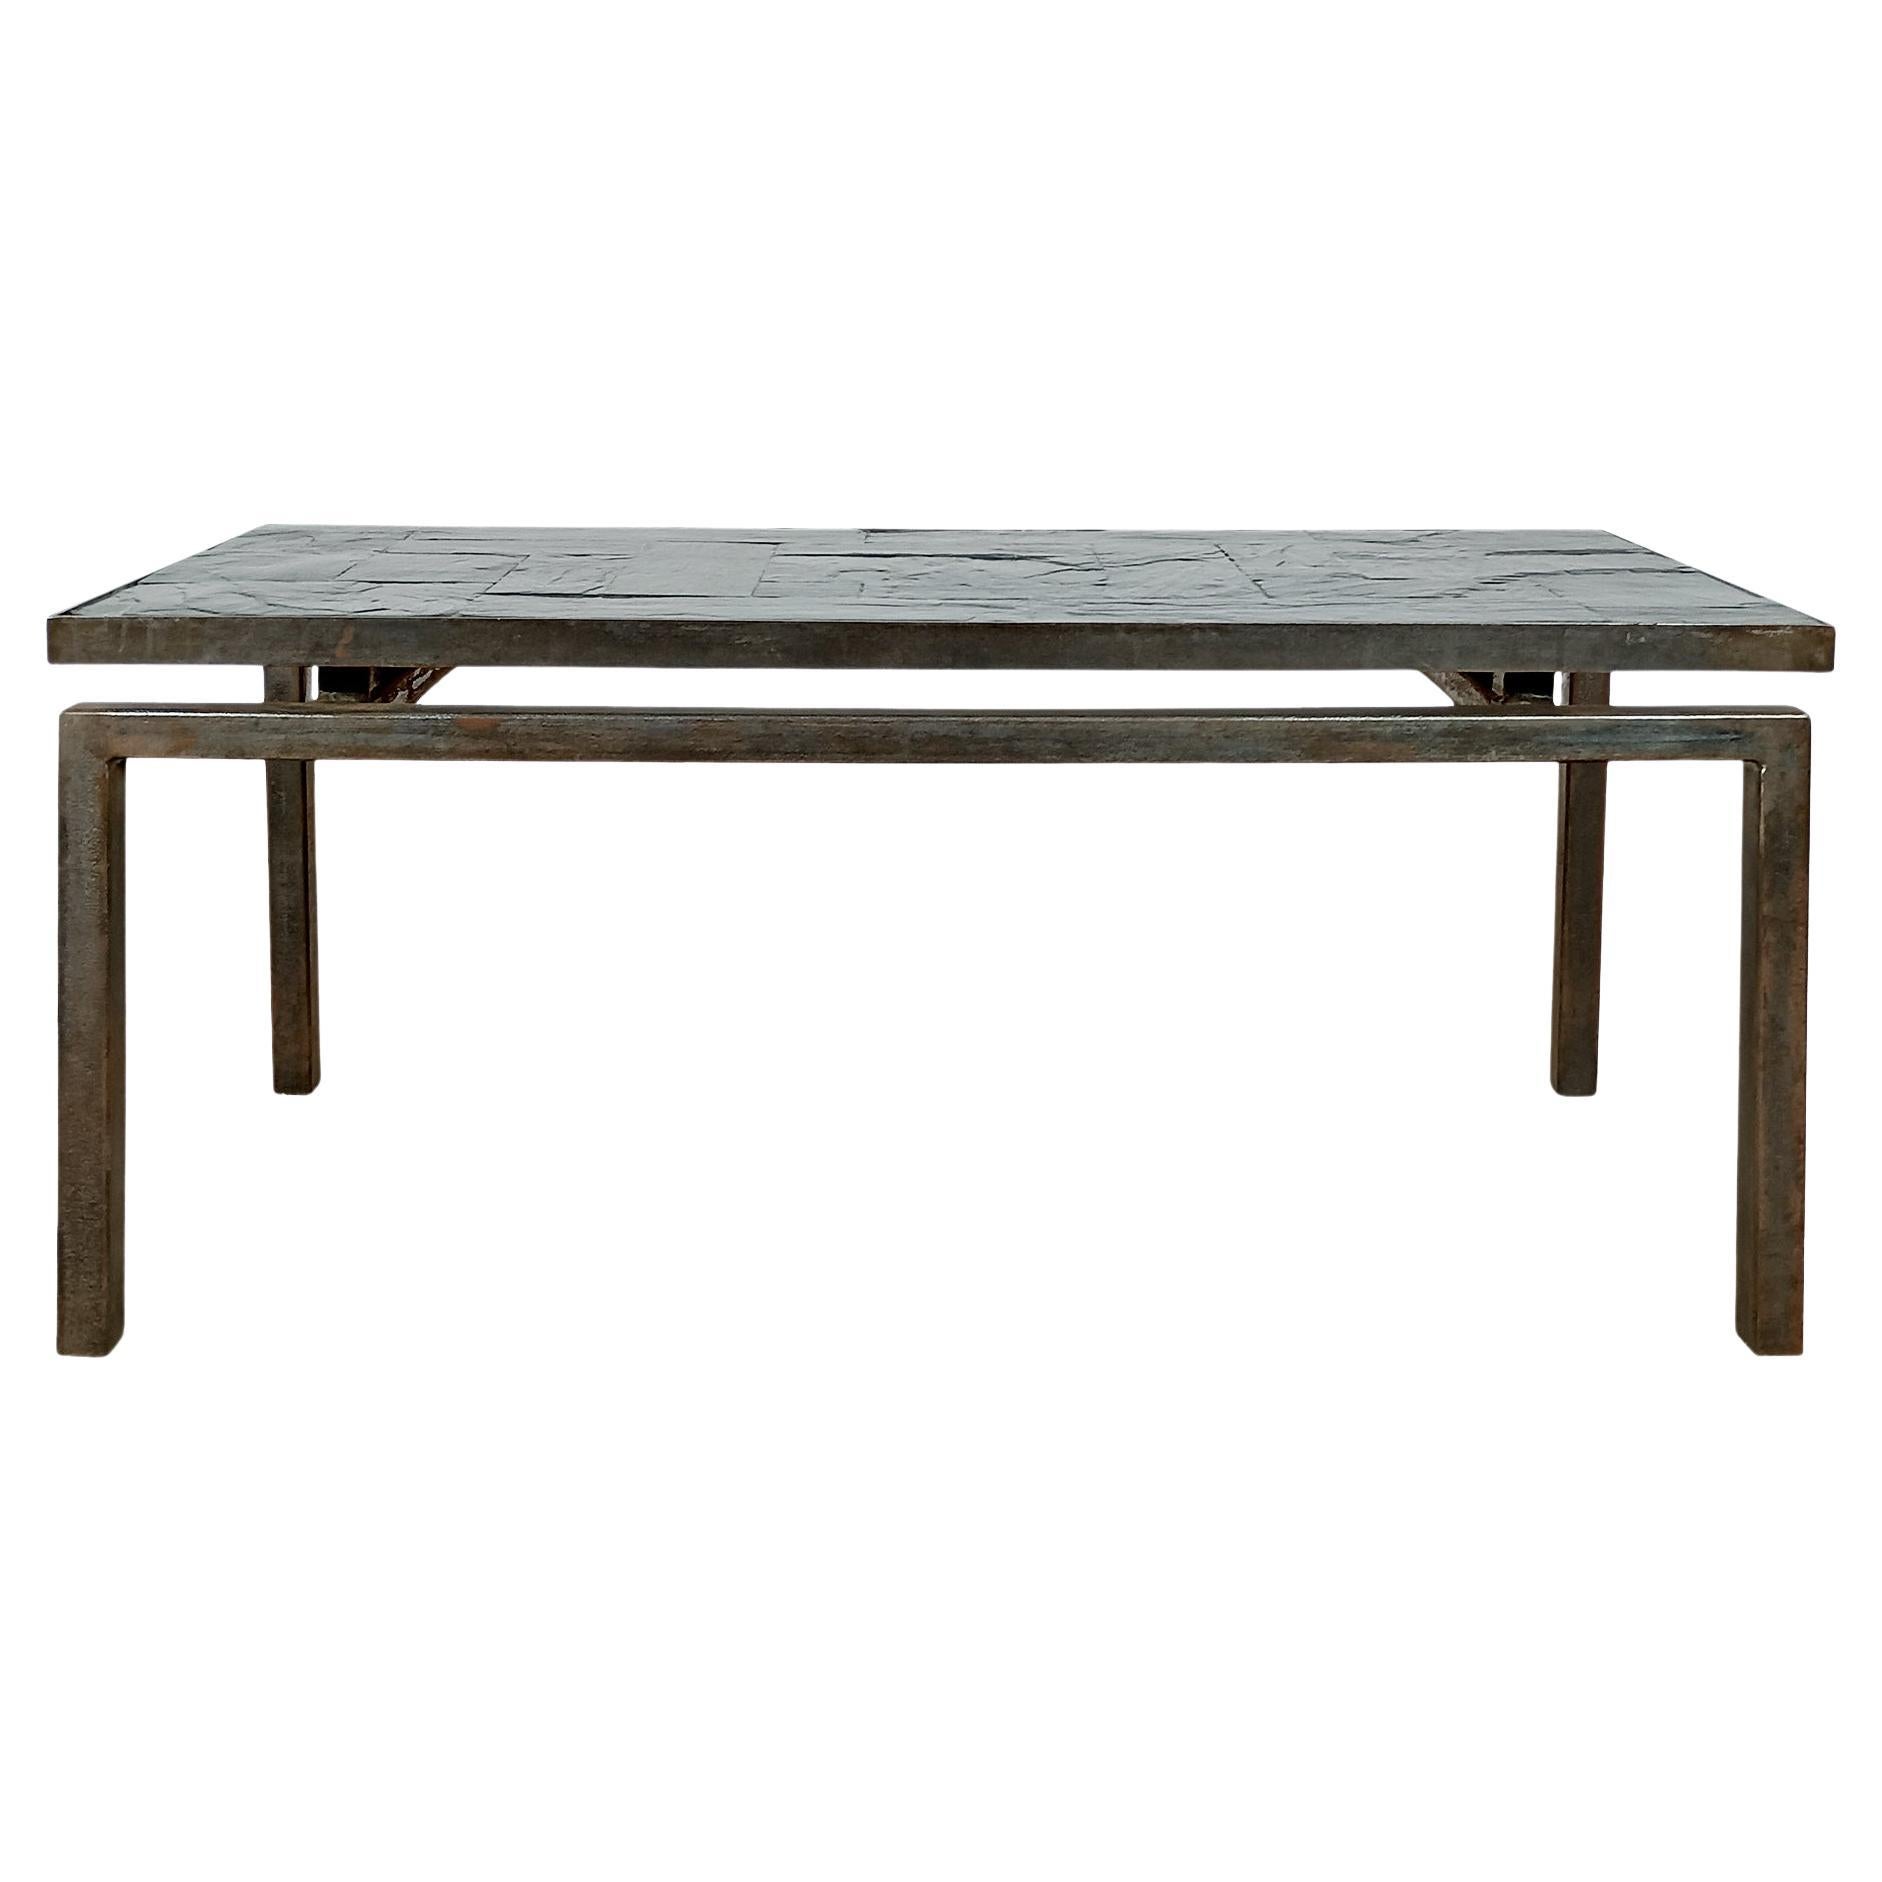 Mid-Century Modern Thick Slate Coffee Table In A Steel Frame - France, 1970